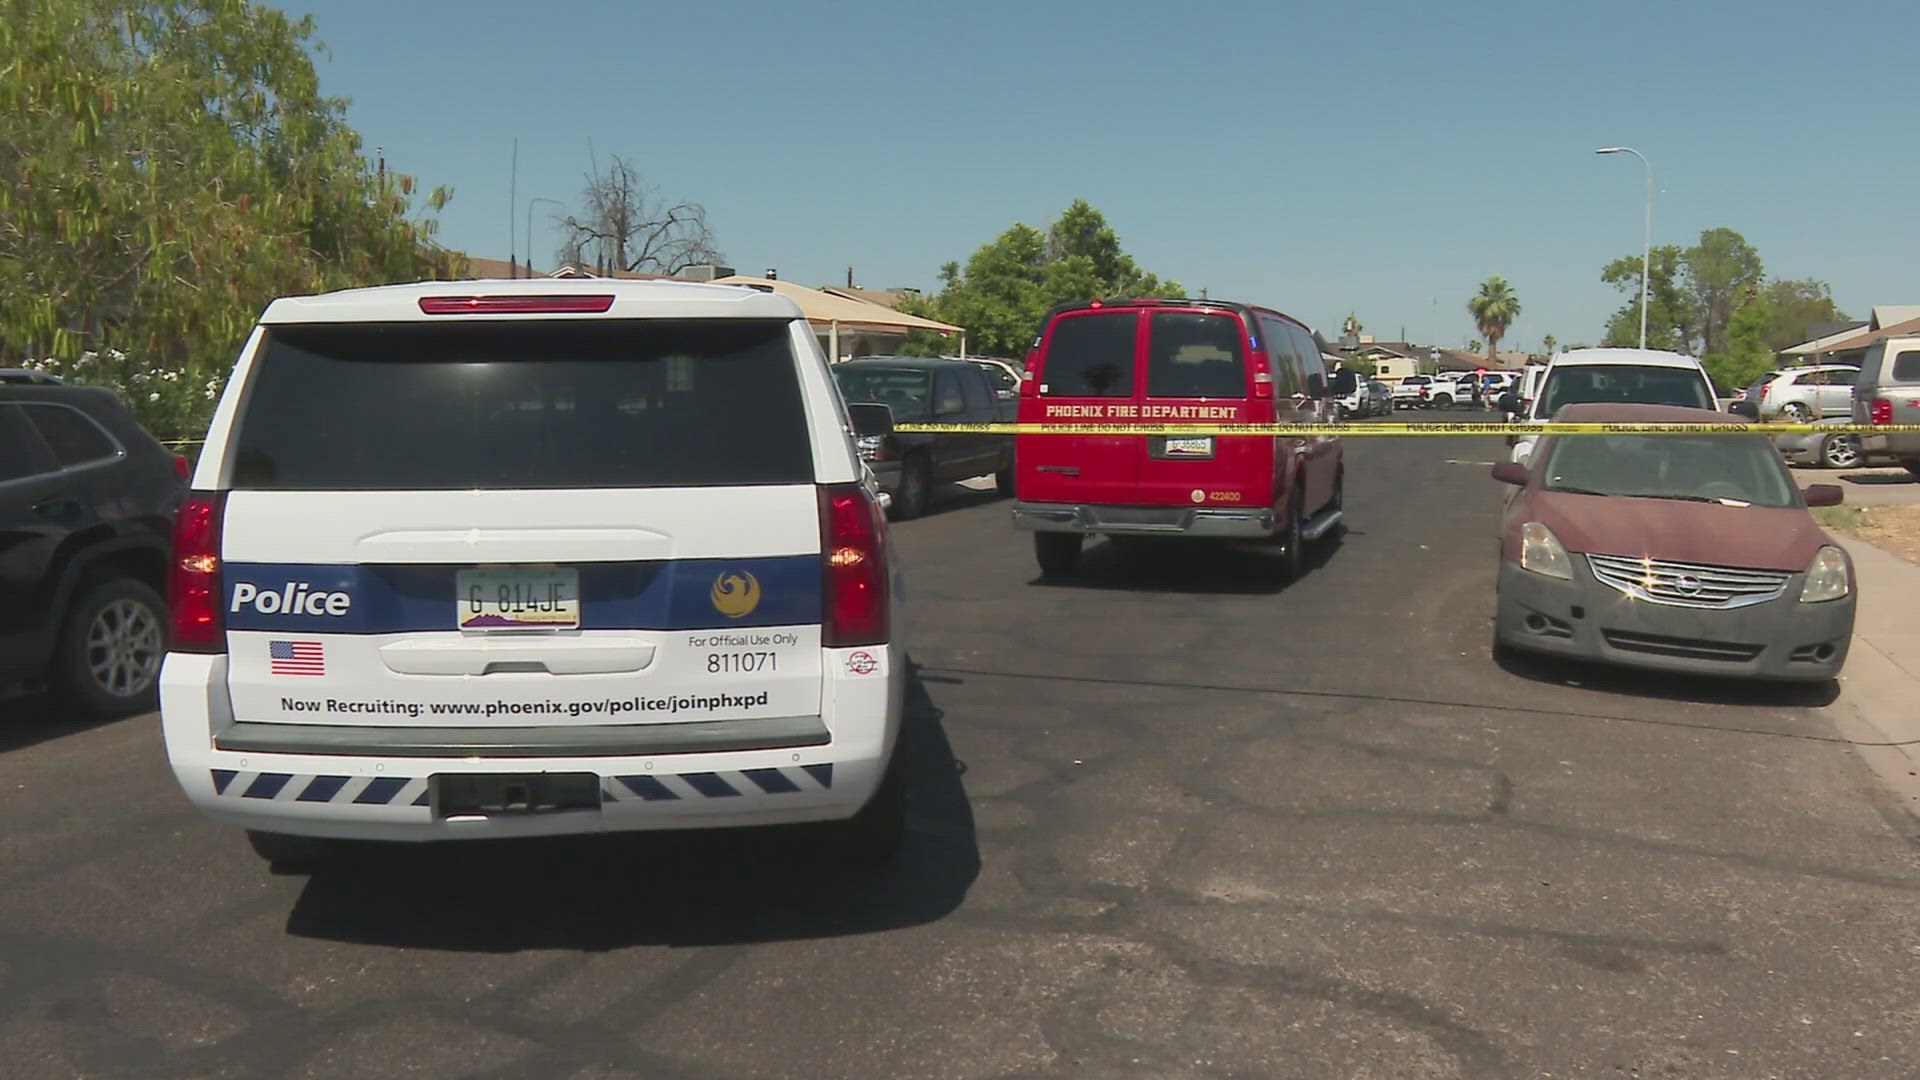 A 1-year-old boy died after being pulled from a hot tub and a 2-year-old girl was pulled from a backyard pool. Both incidents happened in Phoenix on Saturday.